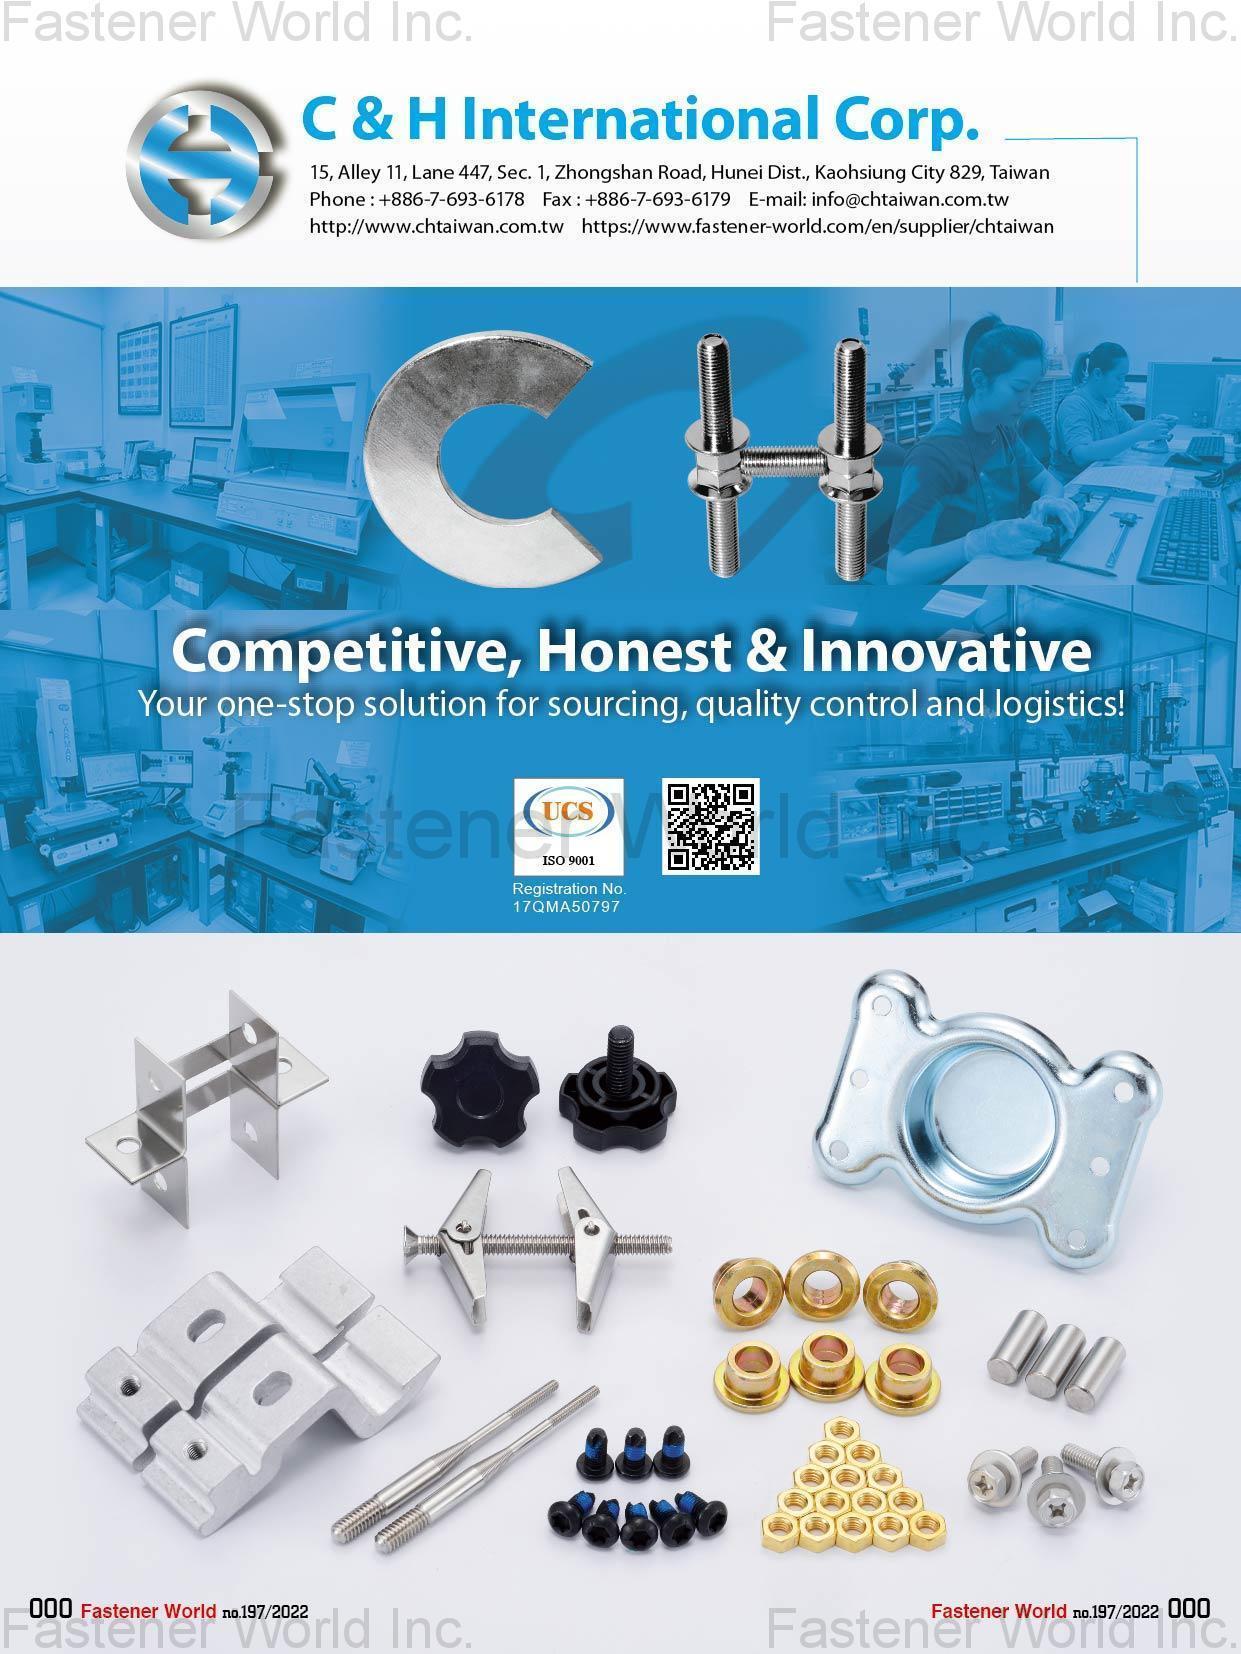 C&H INTERNATIONAL CORP. , Nuts, Bolts, Screws, Socket Products, Cap Screws, Washers, Wing Nuts, Threaded Rod, Cotter Pins, Wheel Nuts, Anchors, Stamped Parts, Commercial Parts in both Metric (ISO/DIN) and Imperial (IFI) Sizes and all Materials.